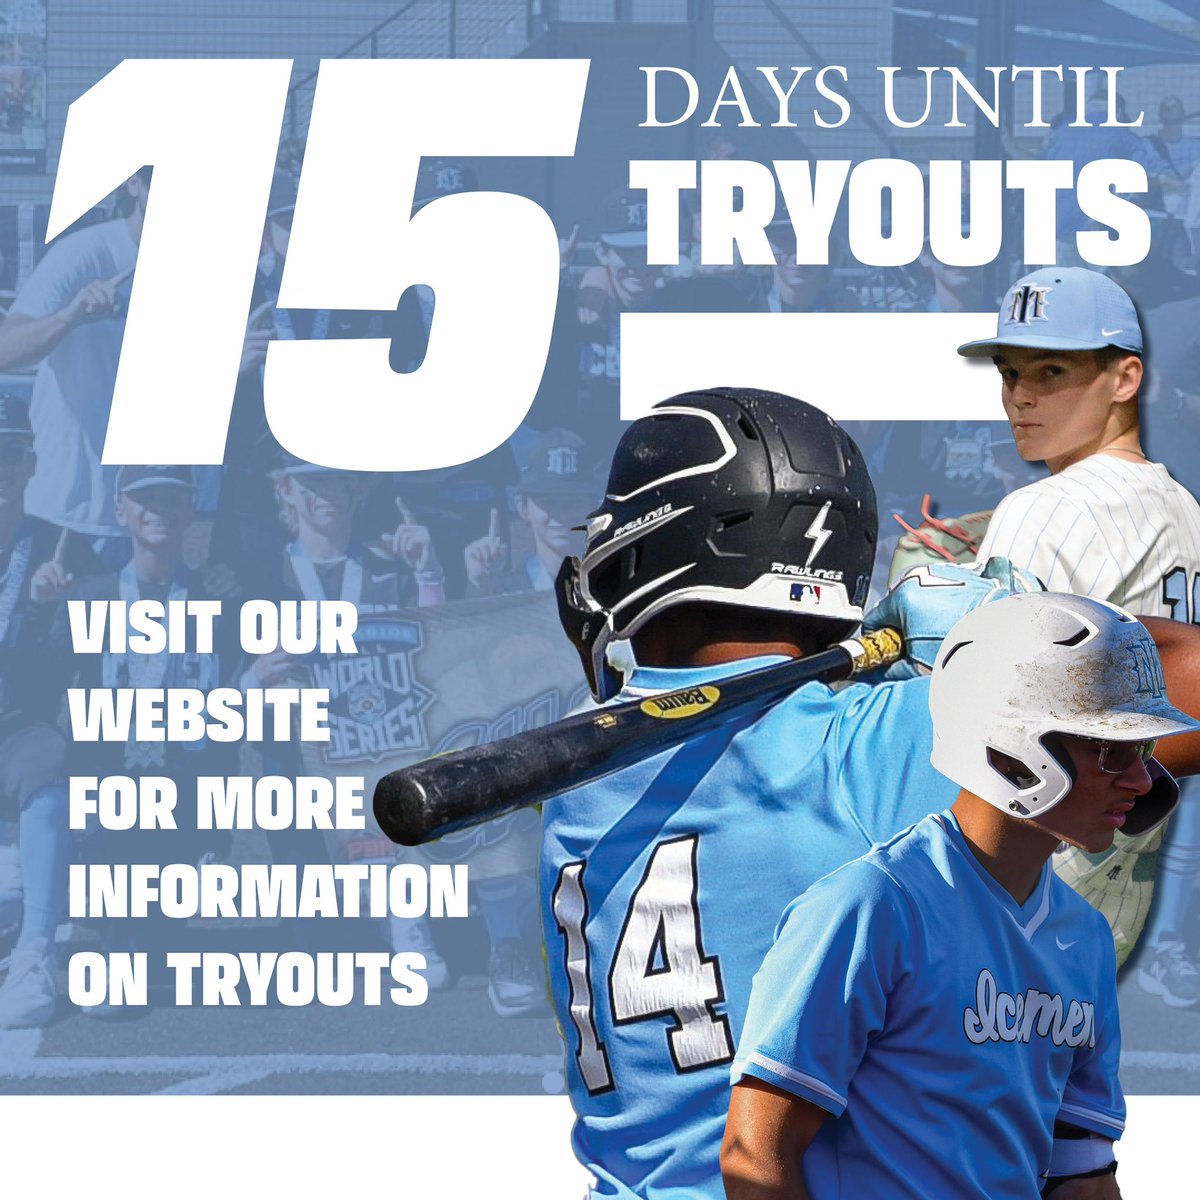 15 days left until fall tryouts! If you are interested in playing for us this fall make sure to sign up for tryouts while you still can.

Sign up link:
minnesotaicemenbaseball.leagueapps.com/events/4192329…

#iceicebaby #icemenexperience #tryouts